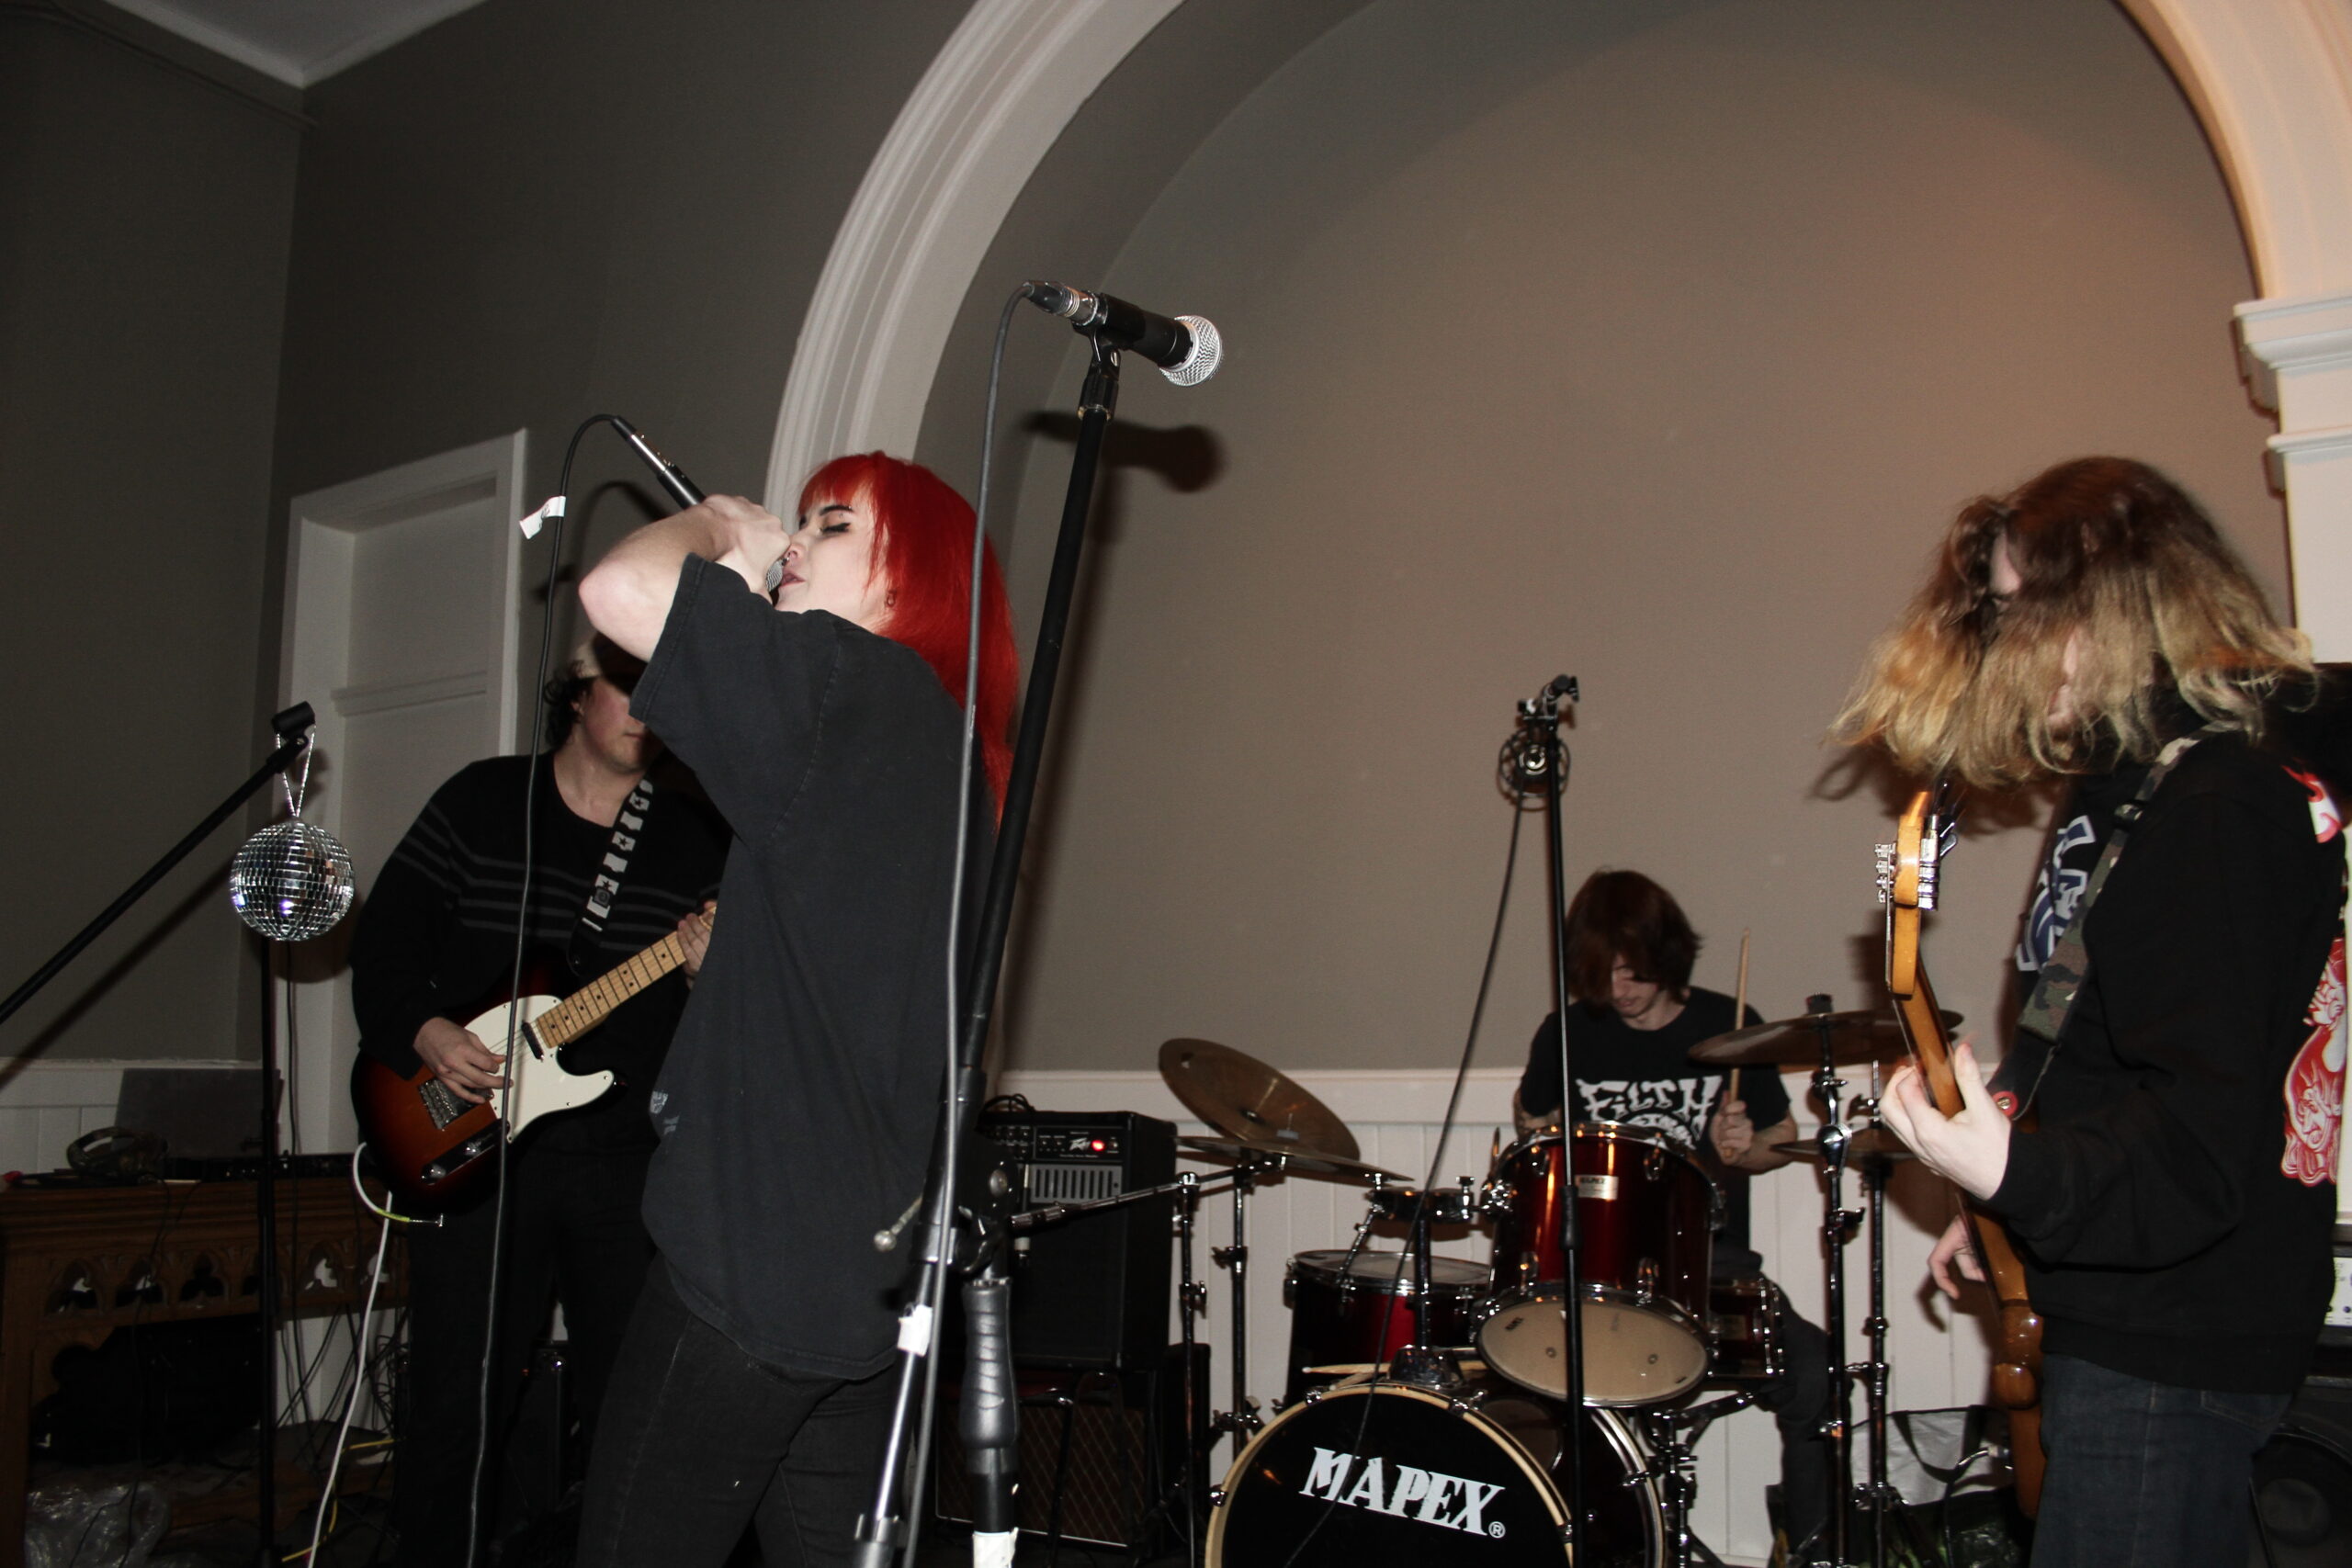 A punk rock bands performs in the Gower Street United Church. The wall is grey and there is a white arch in the middle of it. A silver microphone on a black stand is seen in the foreground. The singer yells into an upraised microphone. She has bright red hair. There are two guitarists, one of which, who is standing on the right, has his blonde hair covering his face. There is a man sitting at a drum kit behind the other three band members. 